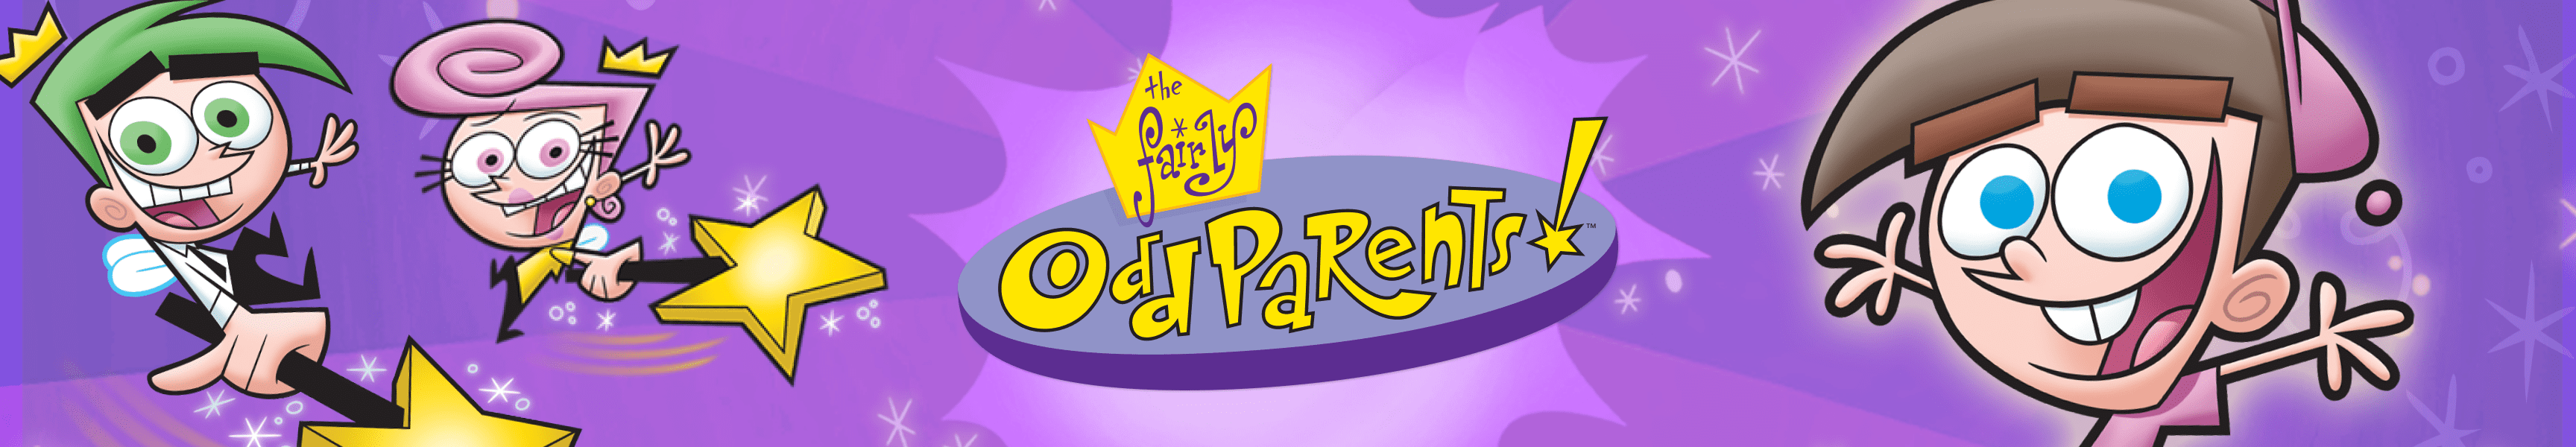 Die Fairly Oddparents